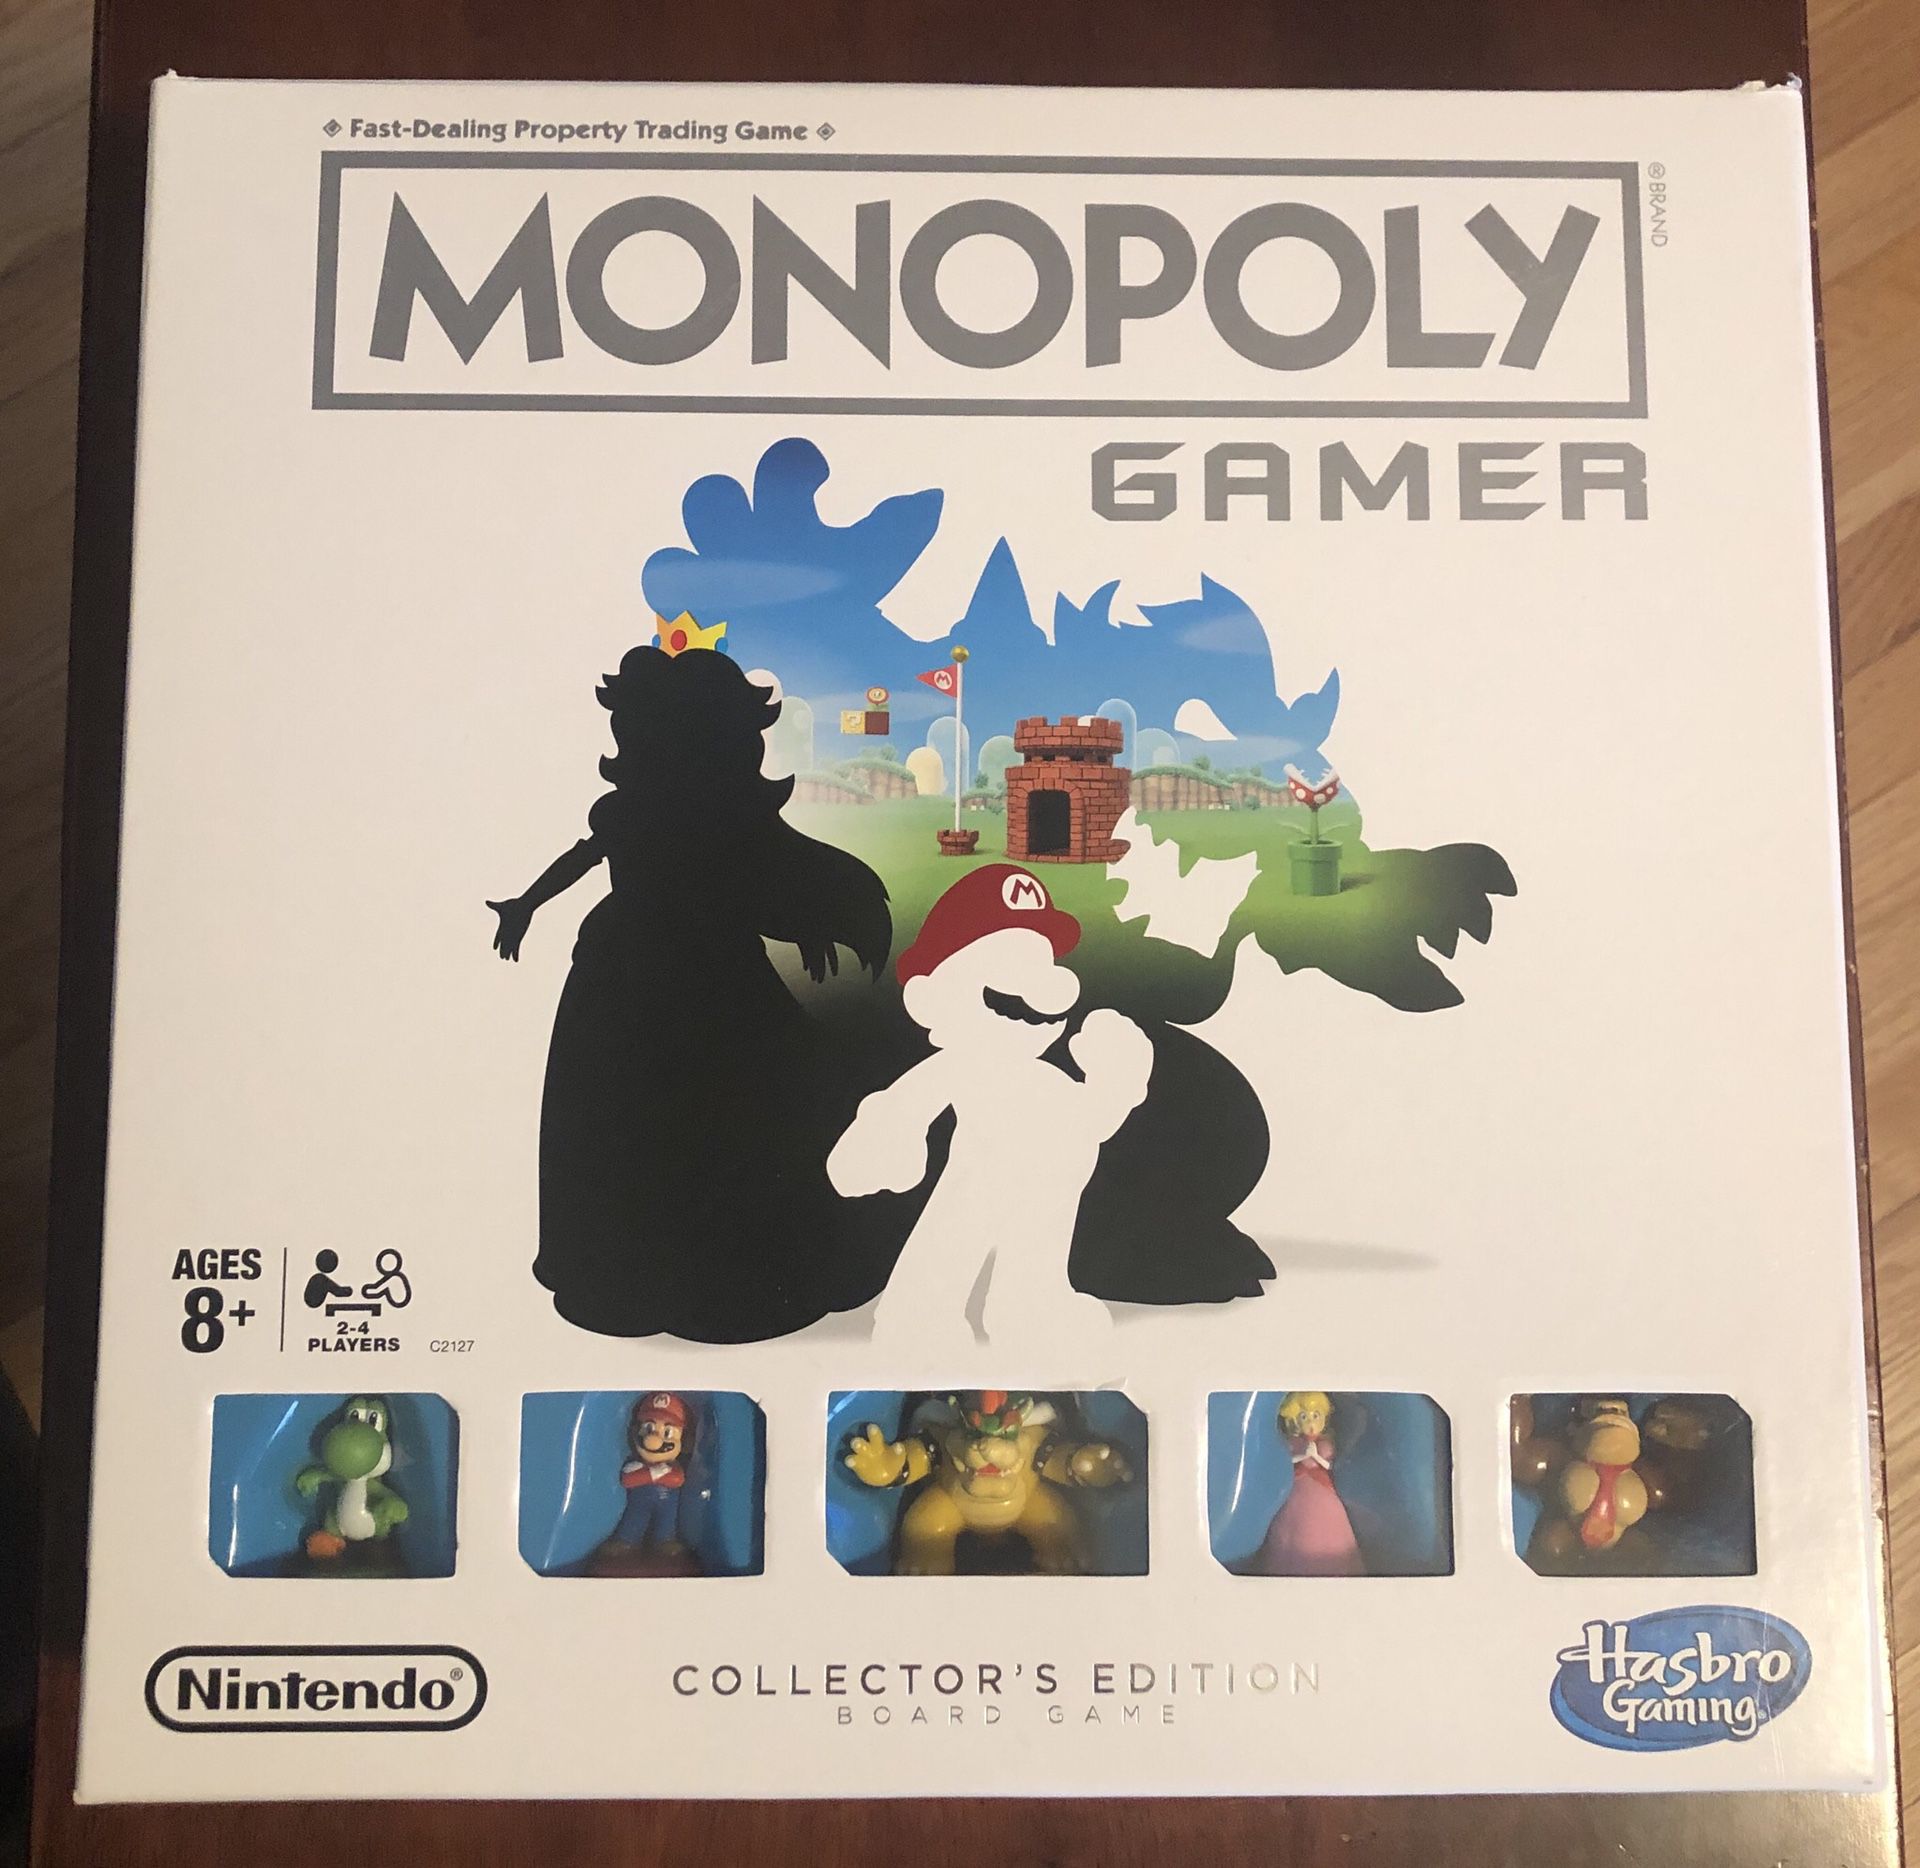 Monopoly Gamer Collectors Edition